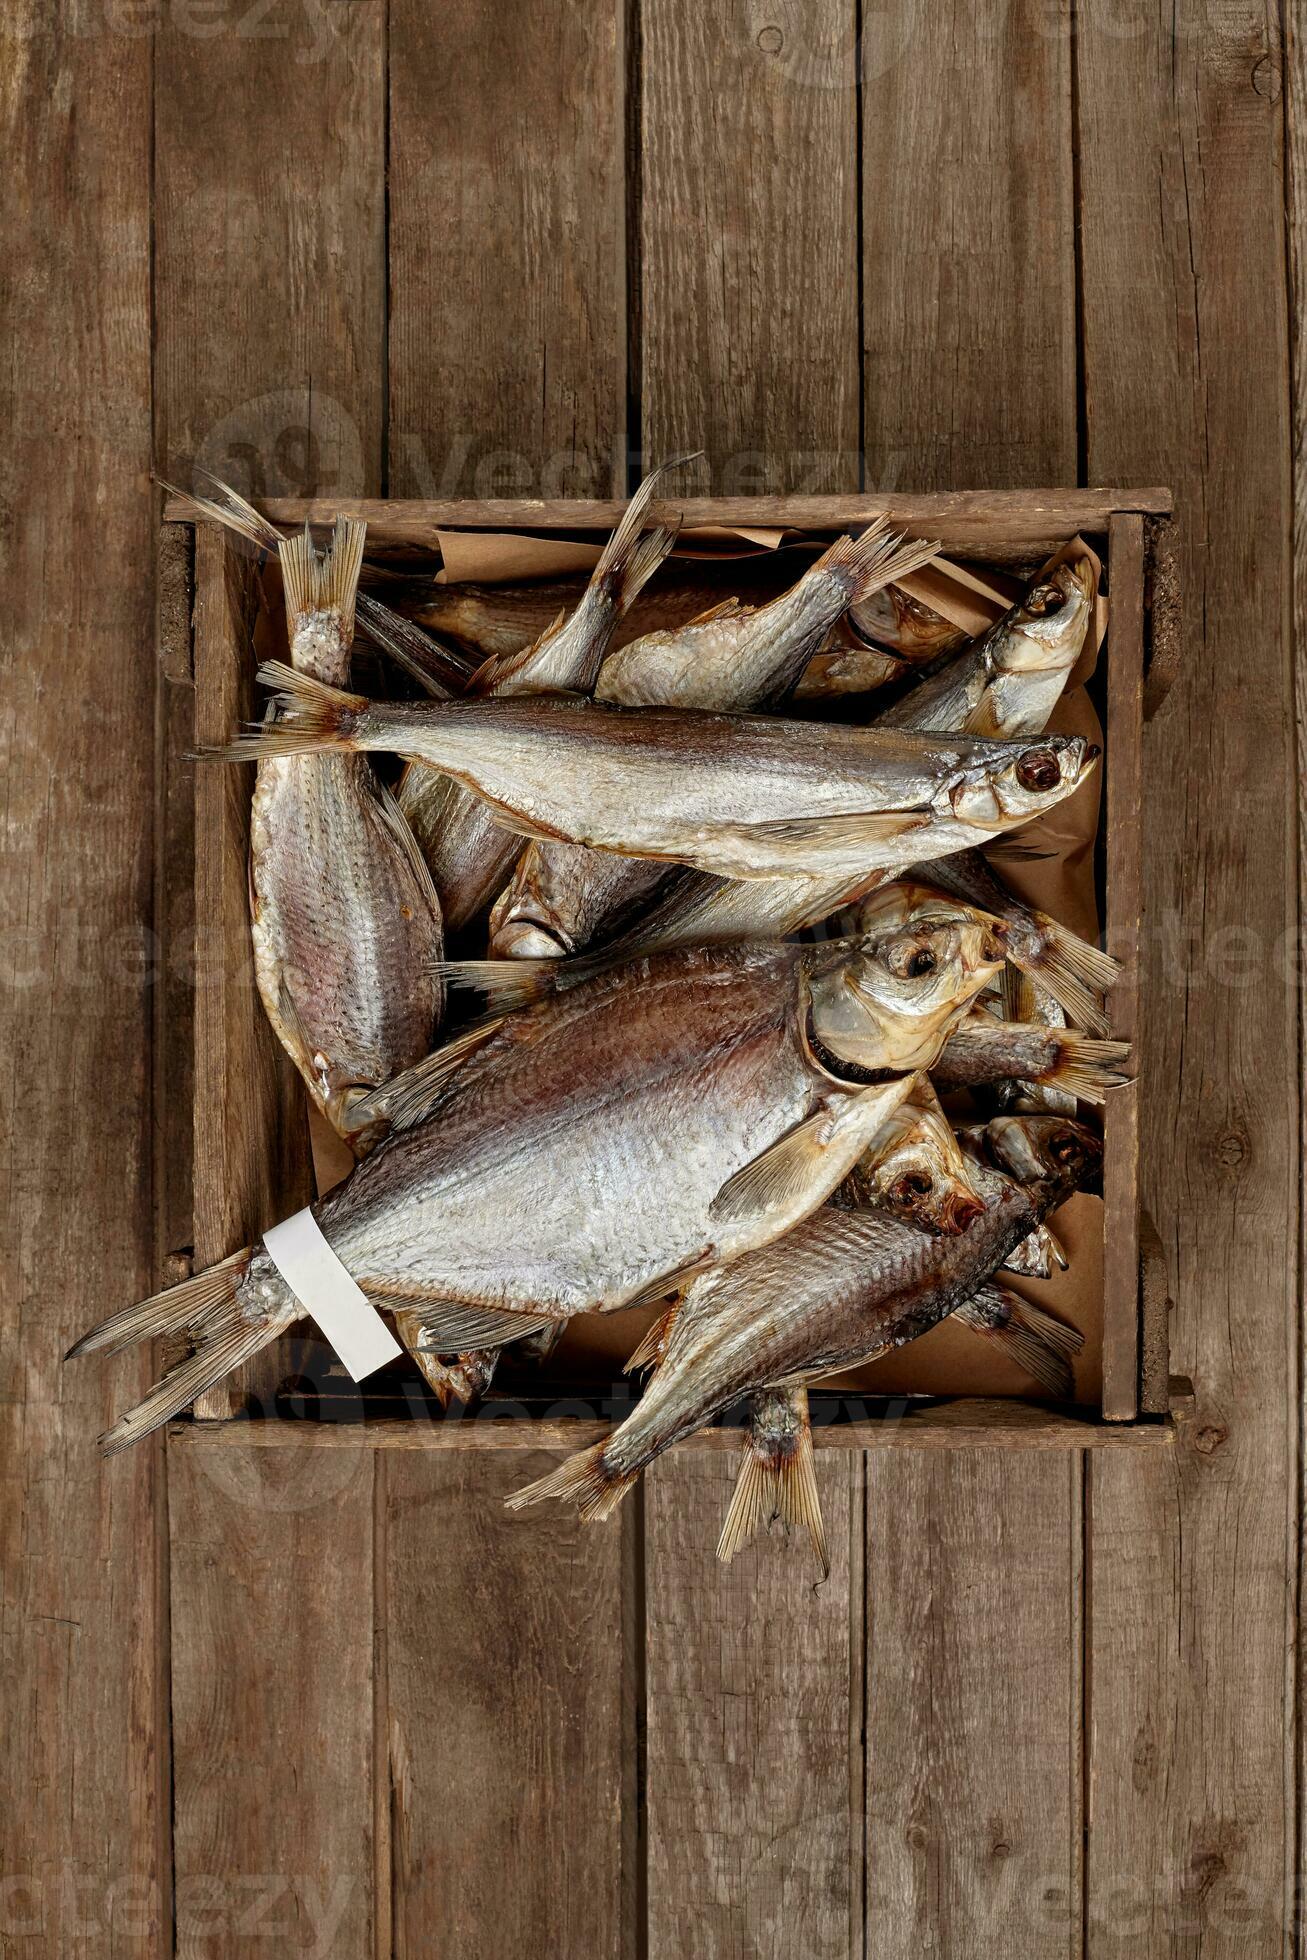 Crate with various sun-dried fish on wooden planks background 35355212  Stock Photo at Vecteezy